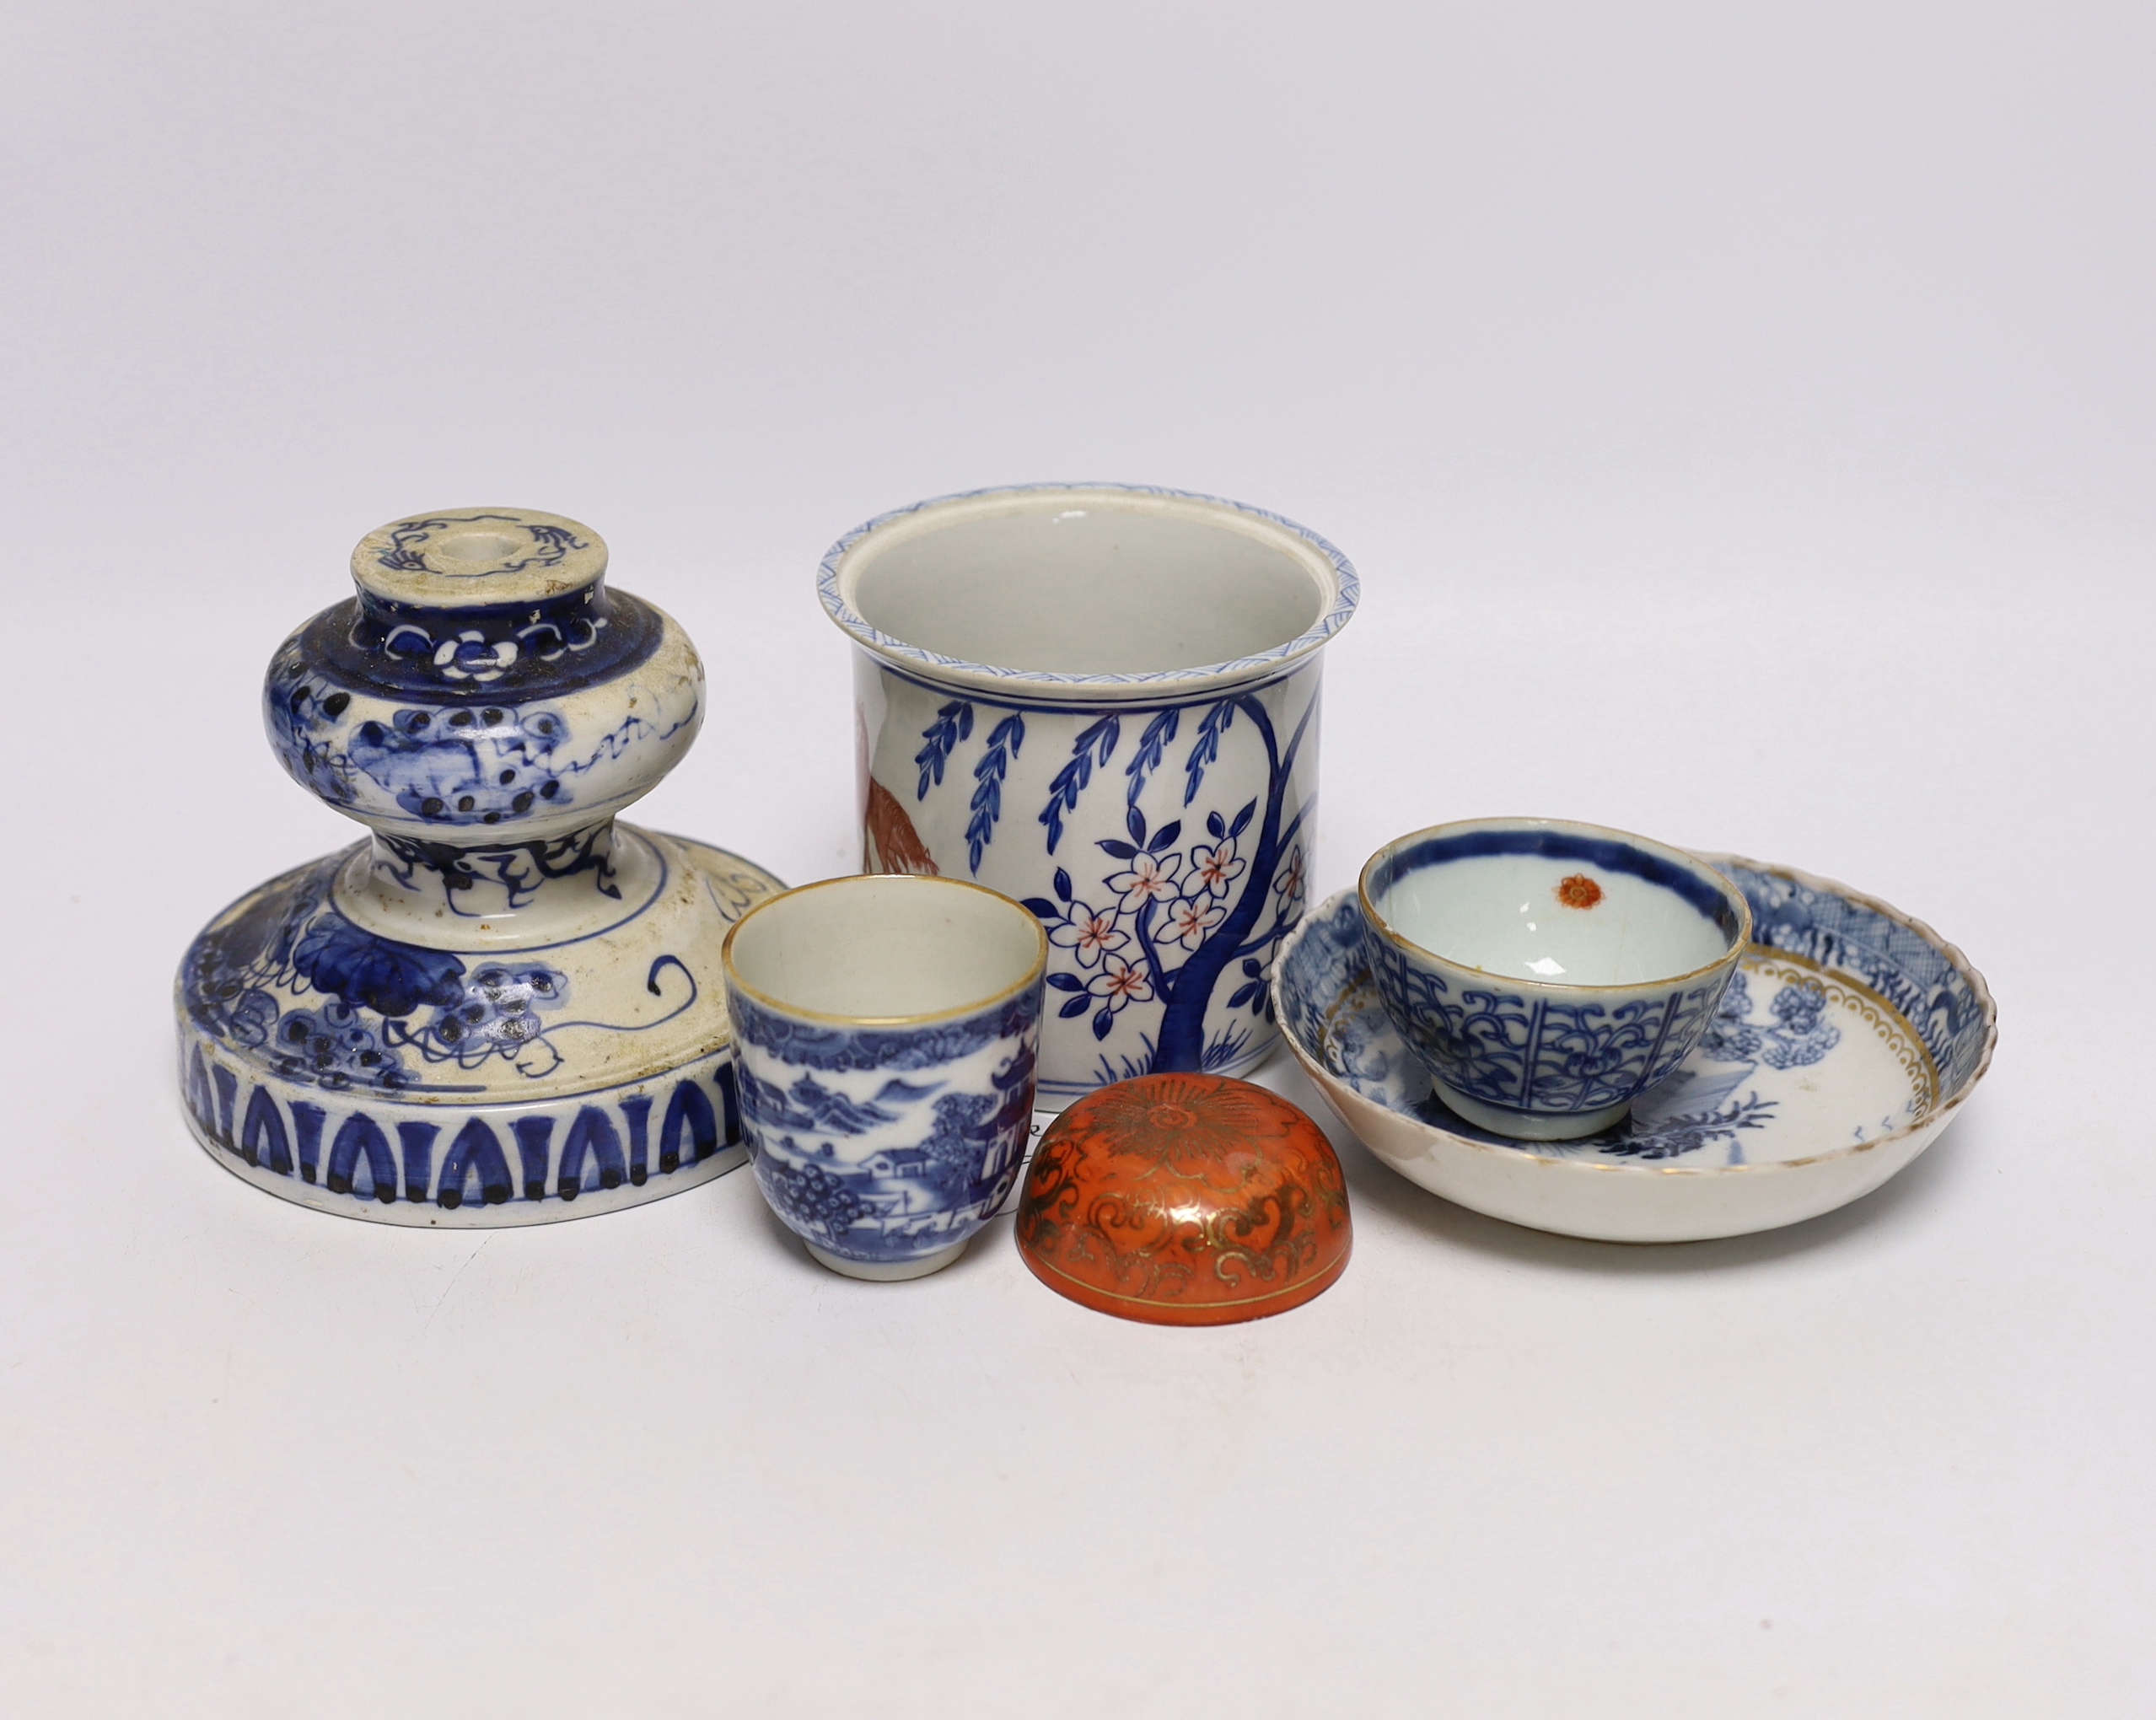 A small collection of various Chinese ceramics